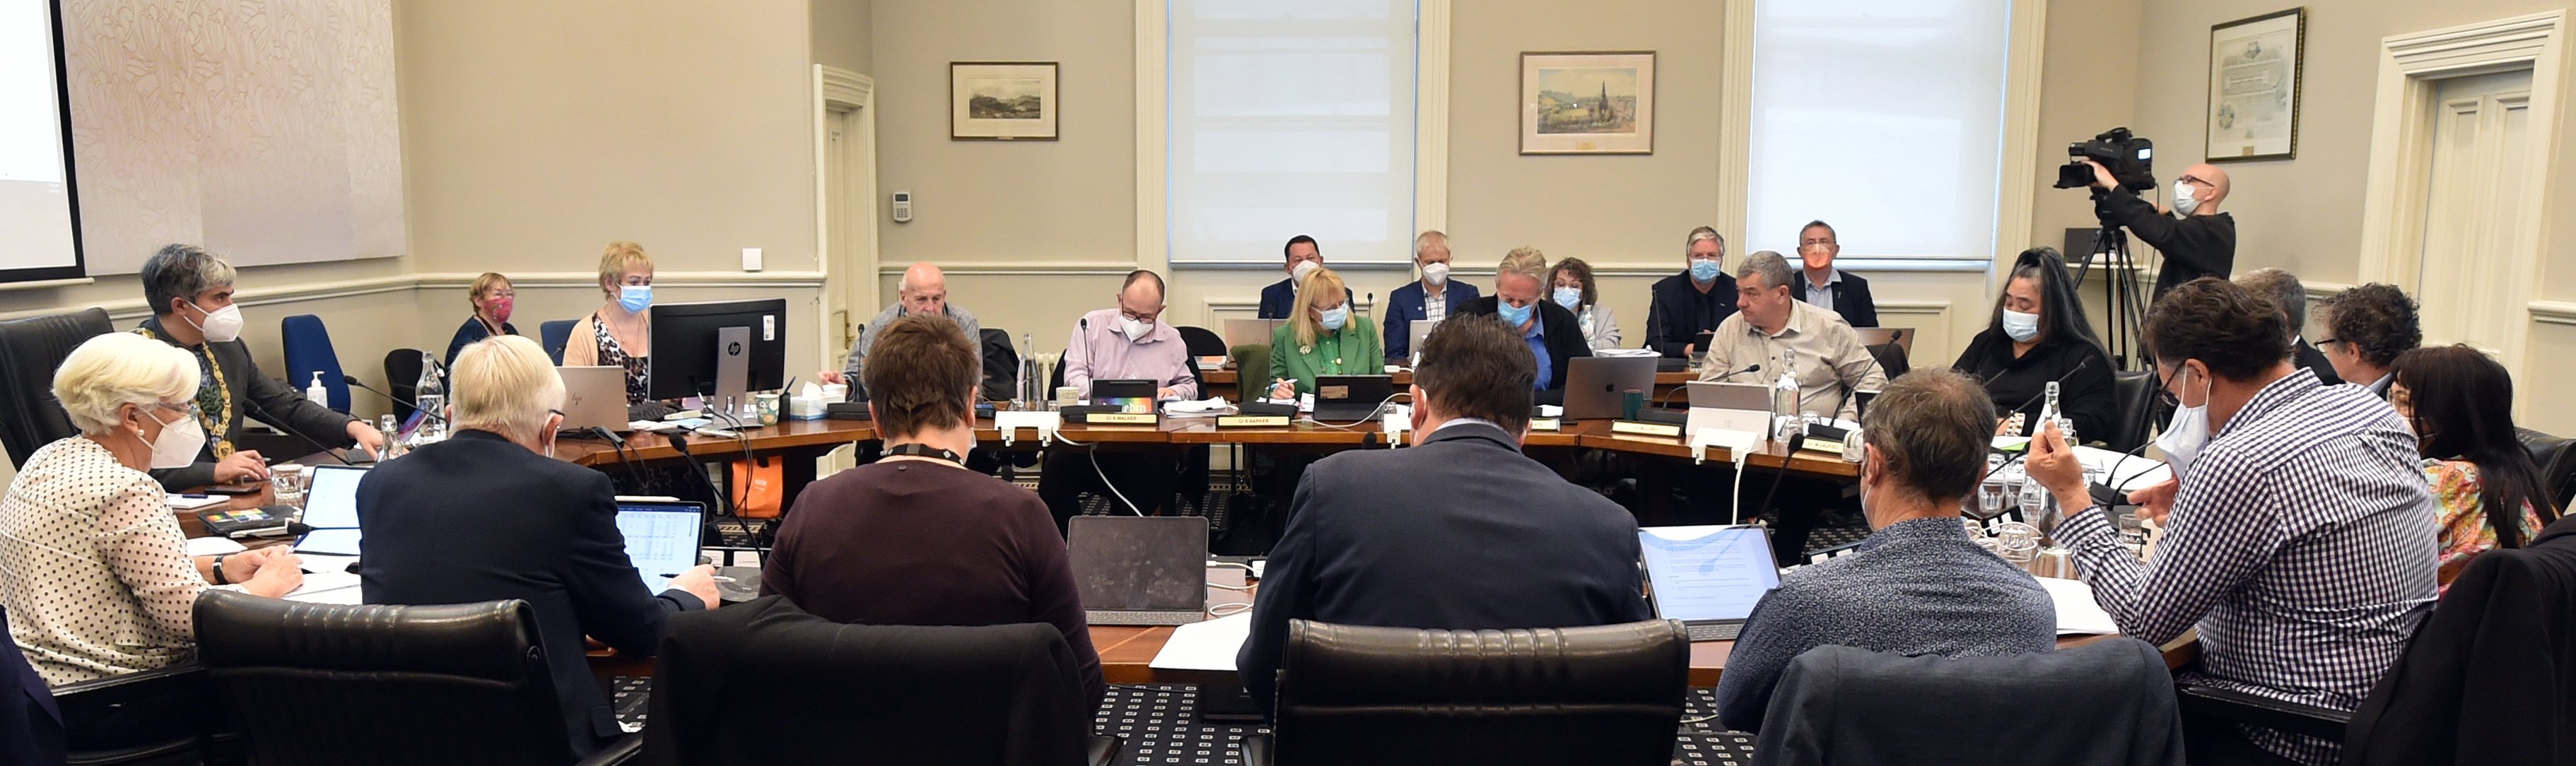 Dunedin city councillors gather to discuss the annual plan yesterday. PHOTO: PETER MCINTOSH
